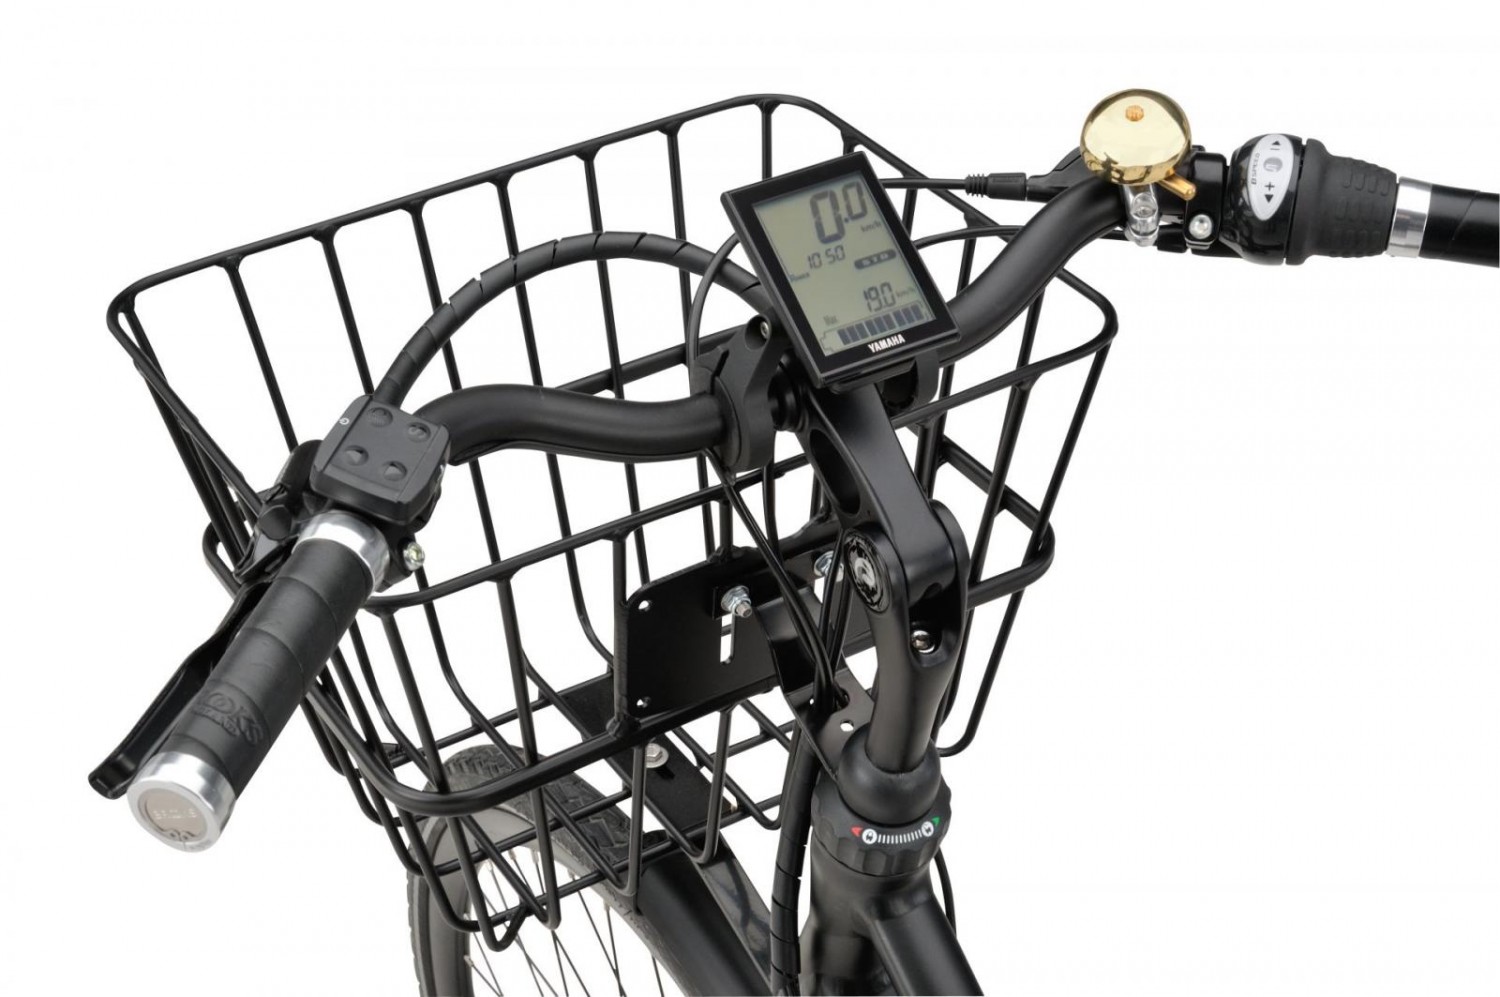 The Harlem E-go bike has a very practical basket in front for all your shopping bags....that is really at nice feature. And the display is also showing you when you have to charge the battery.